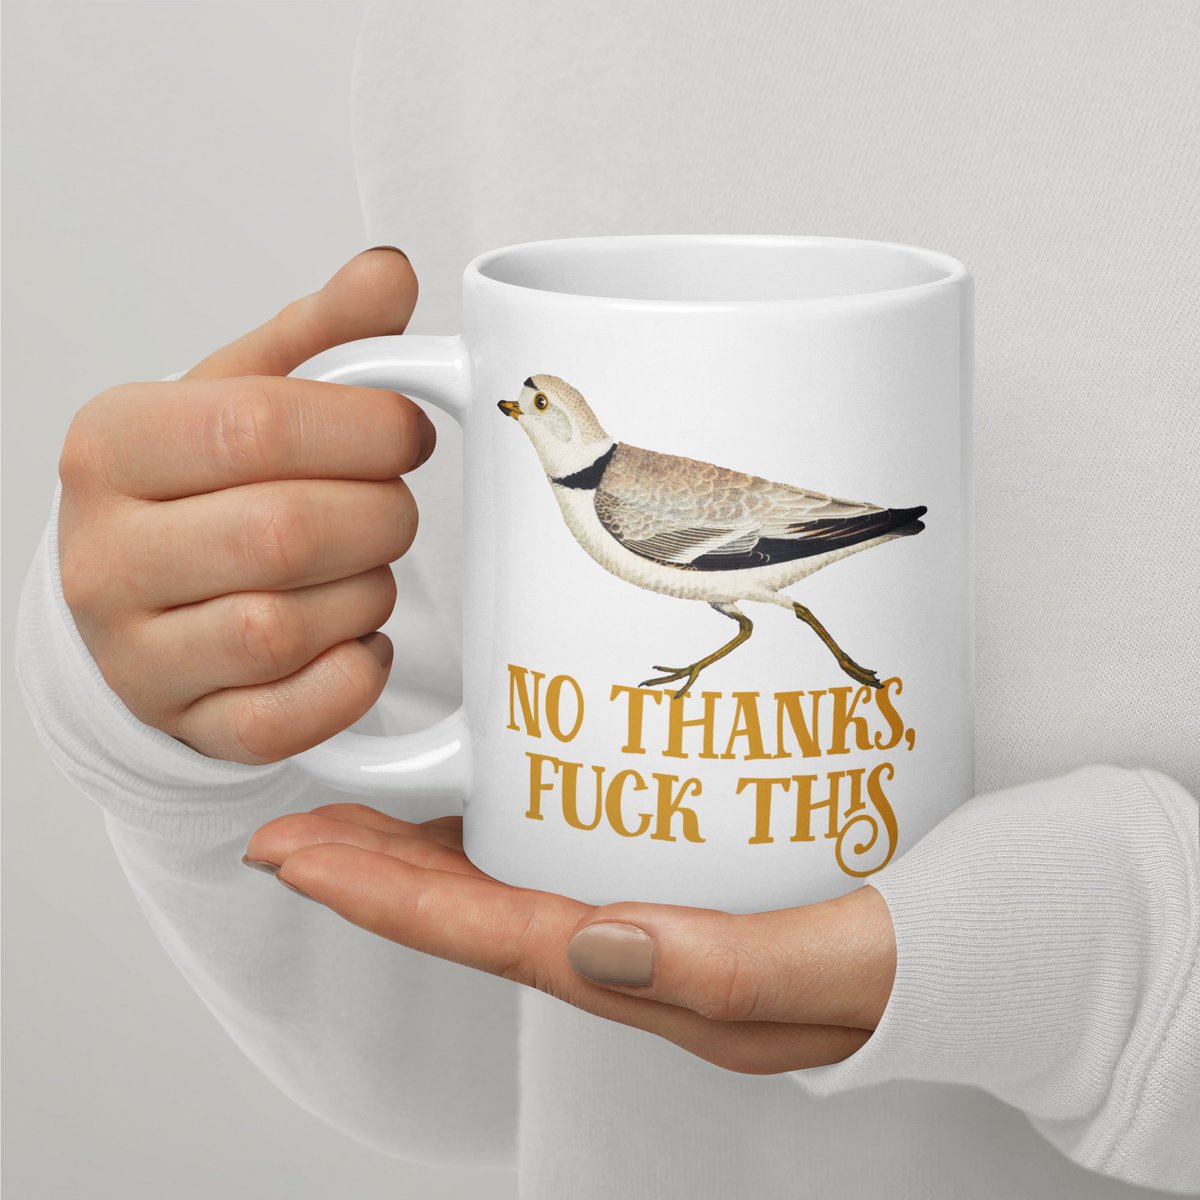 Scammers are once again all over the replies. My store is at effinbirds.com. All these other sites with weird names offering you my stuff on merch are trying to harvest your credit card number. P.S. use the code FUCKBOOTLEGGERS to save a few bucks on the real thing.